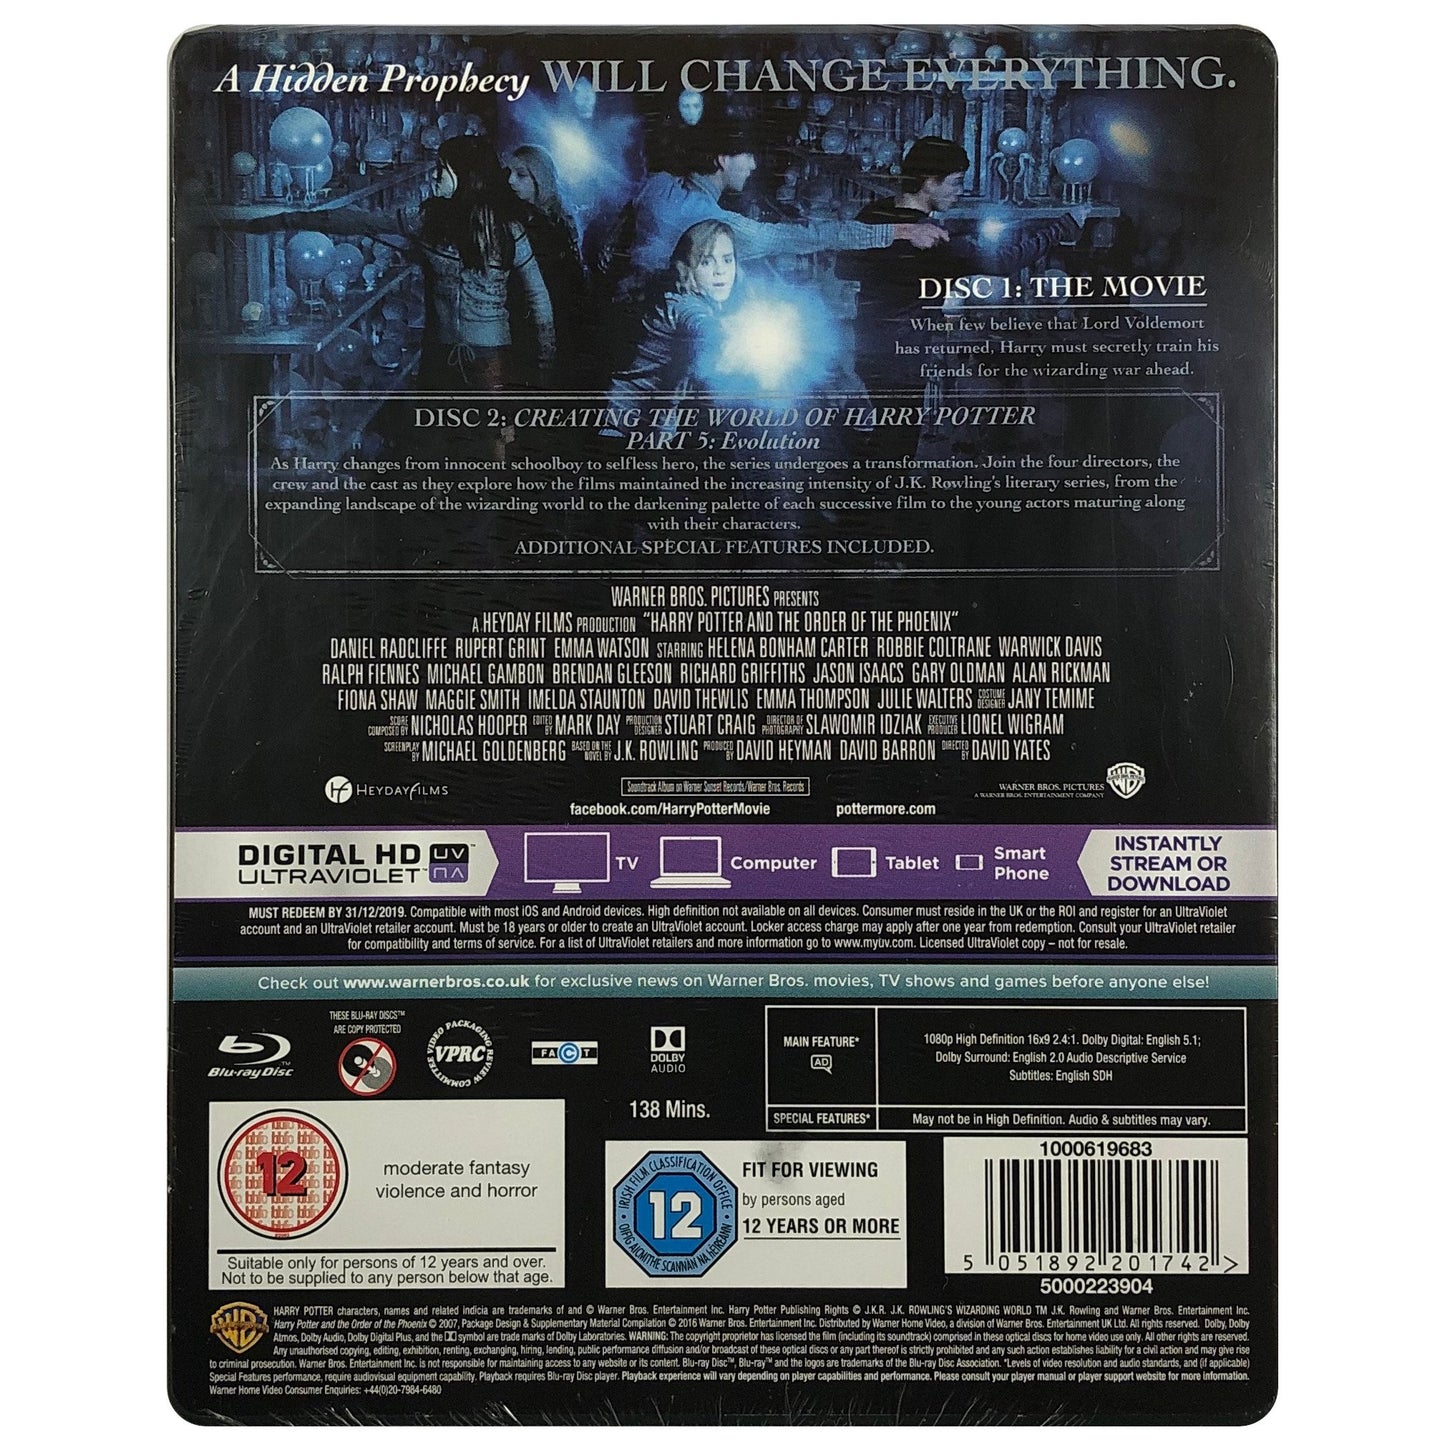 Harry Potter And The Order Of The Phoenix Blu-Ray Steelbook